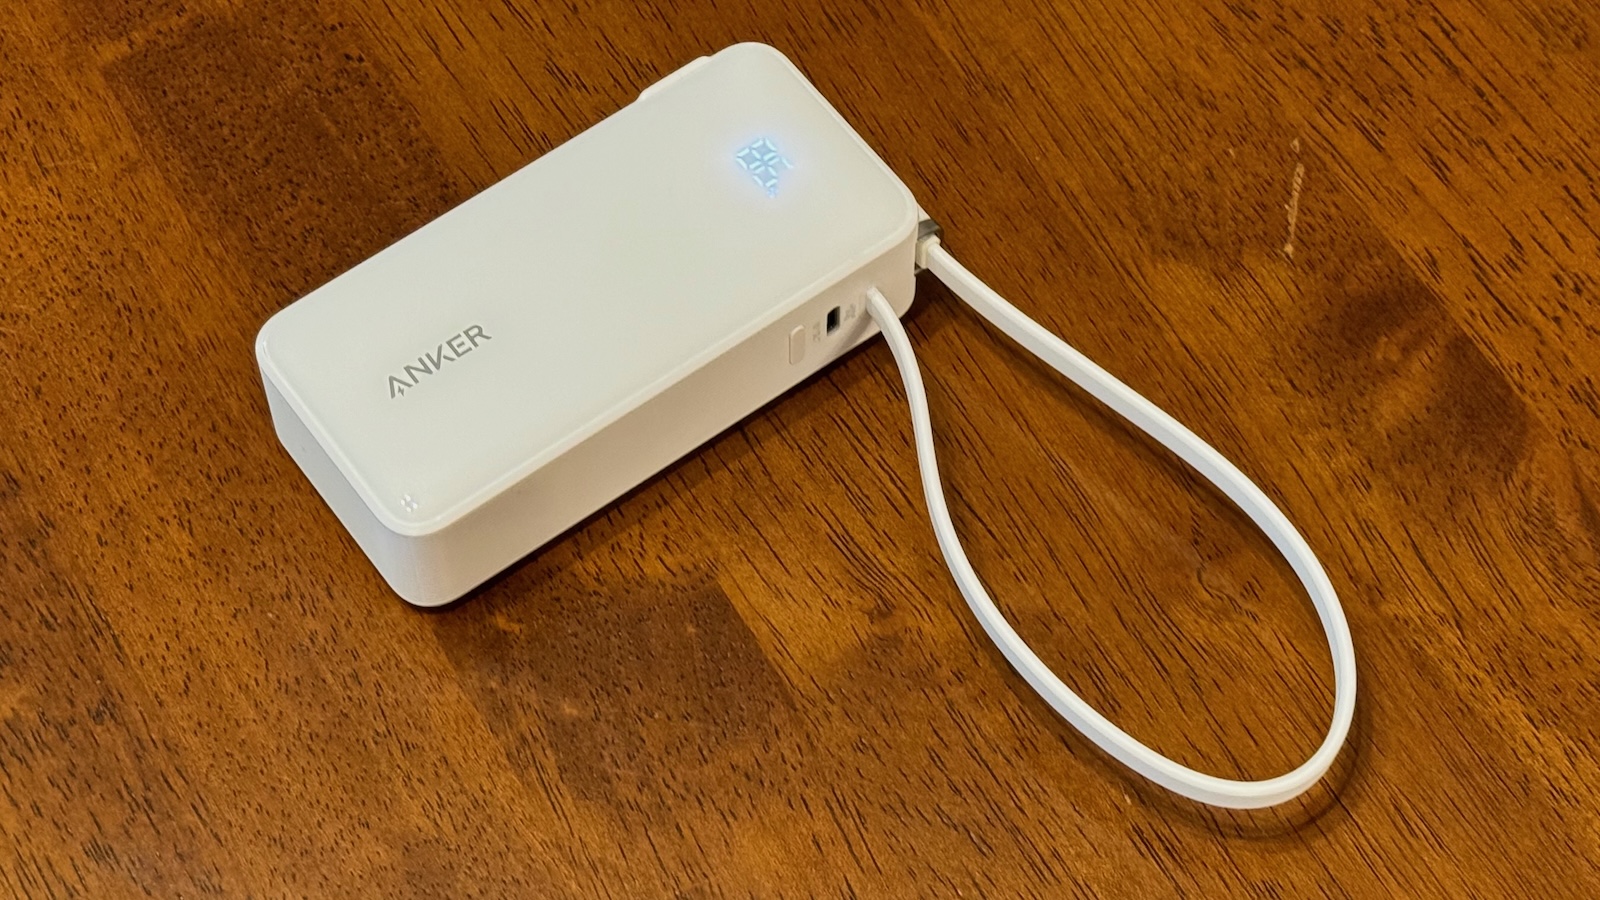 Review: Anker's Latest 3-in-1 Power Bank is a Versatile On-the-Go Powerhouse